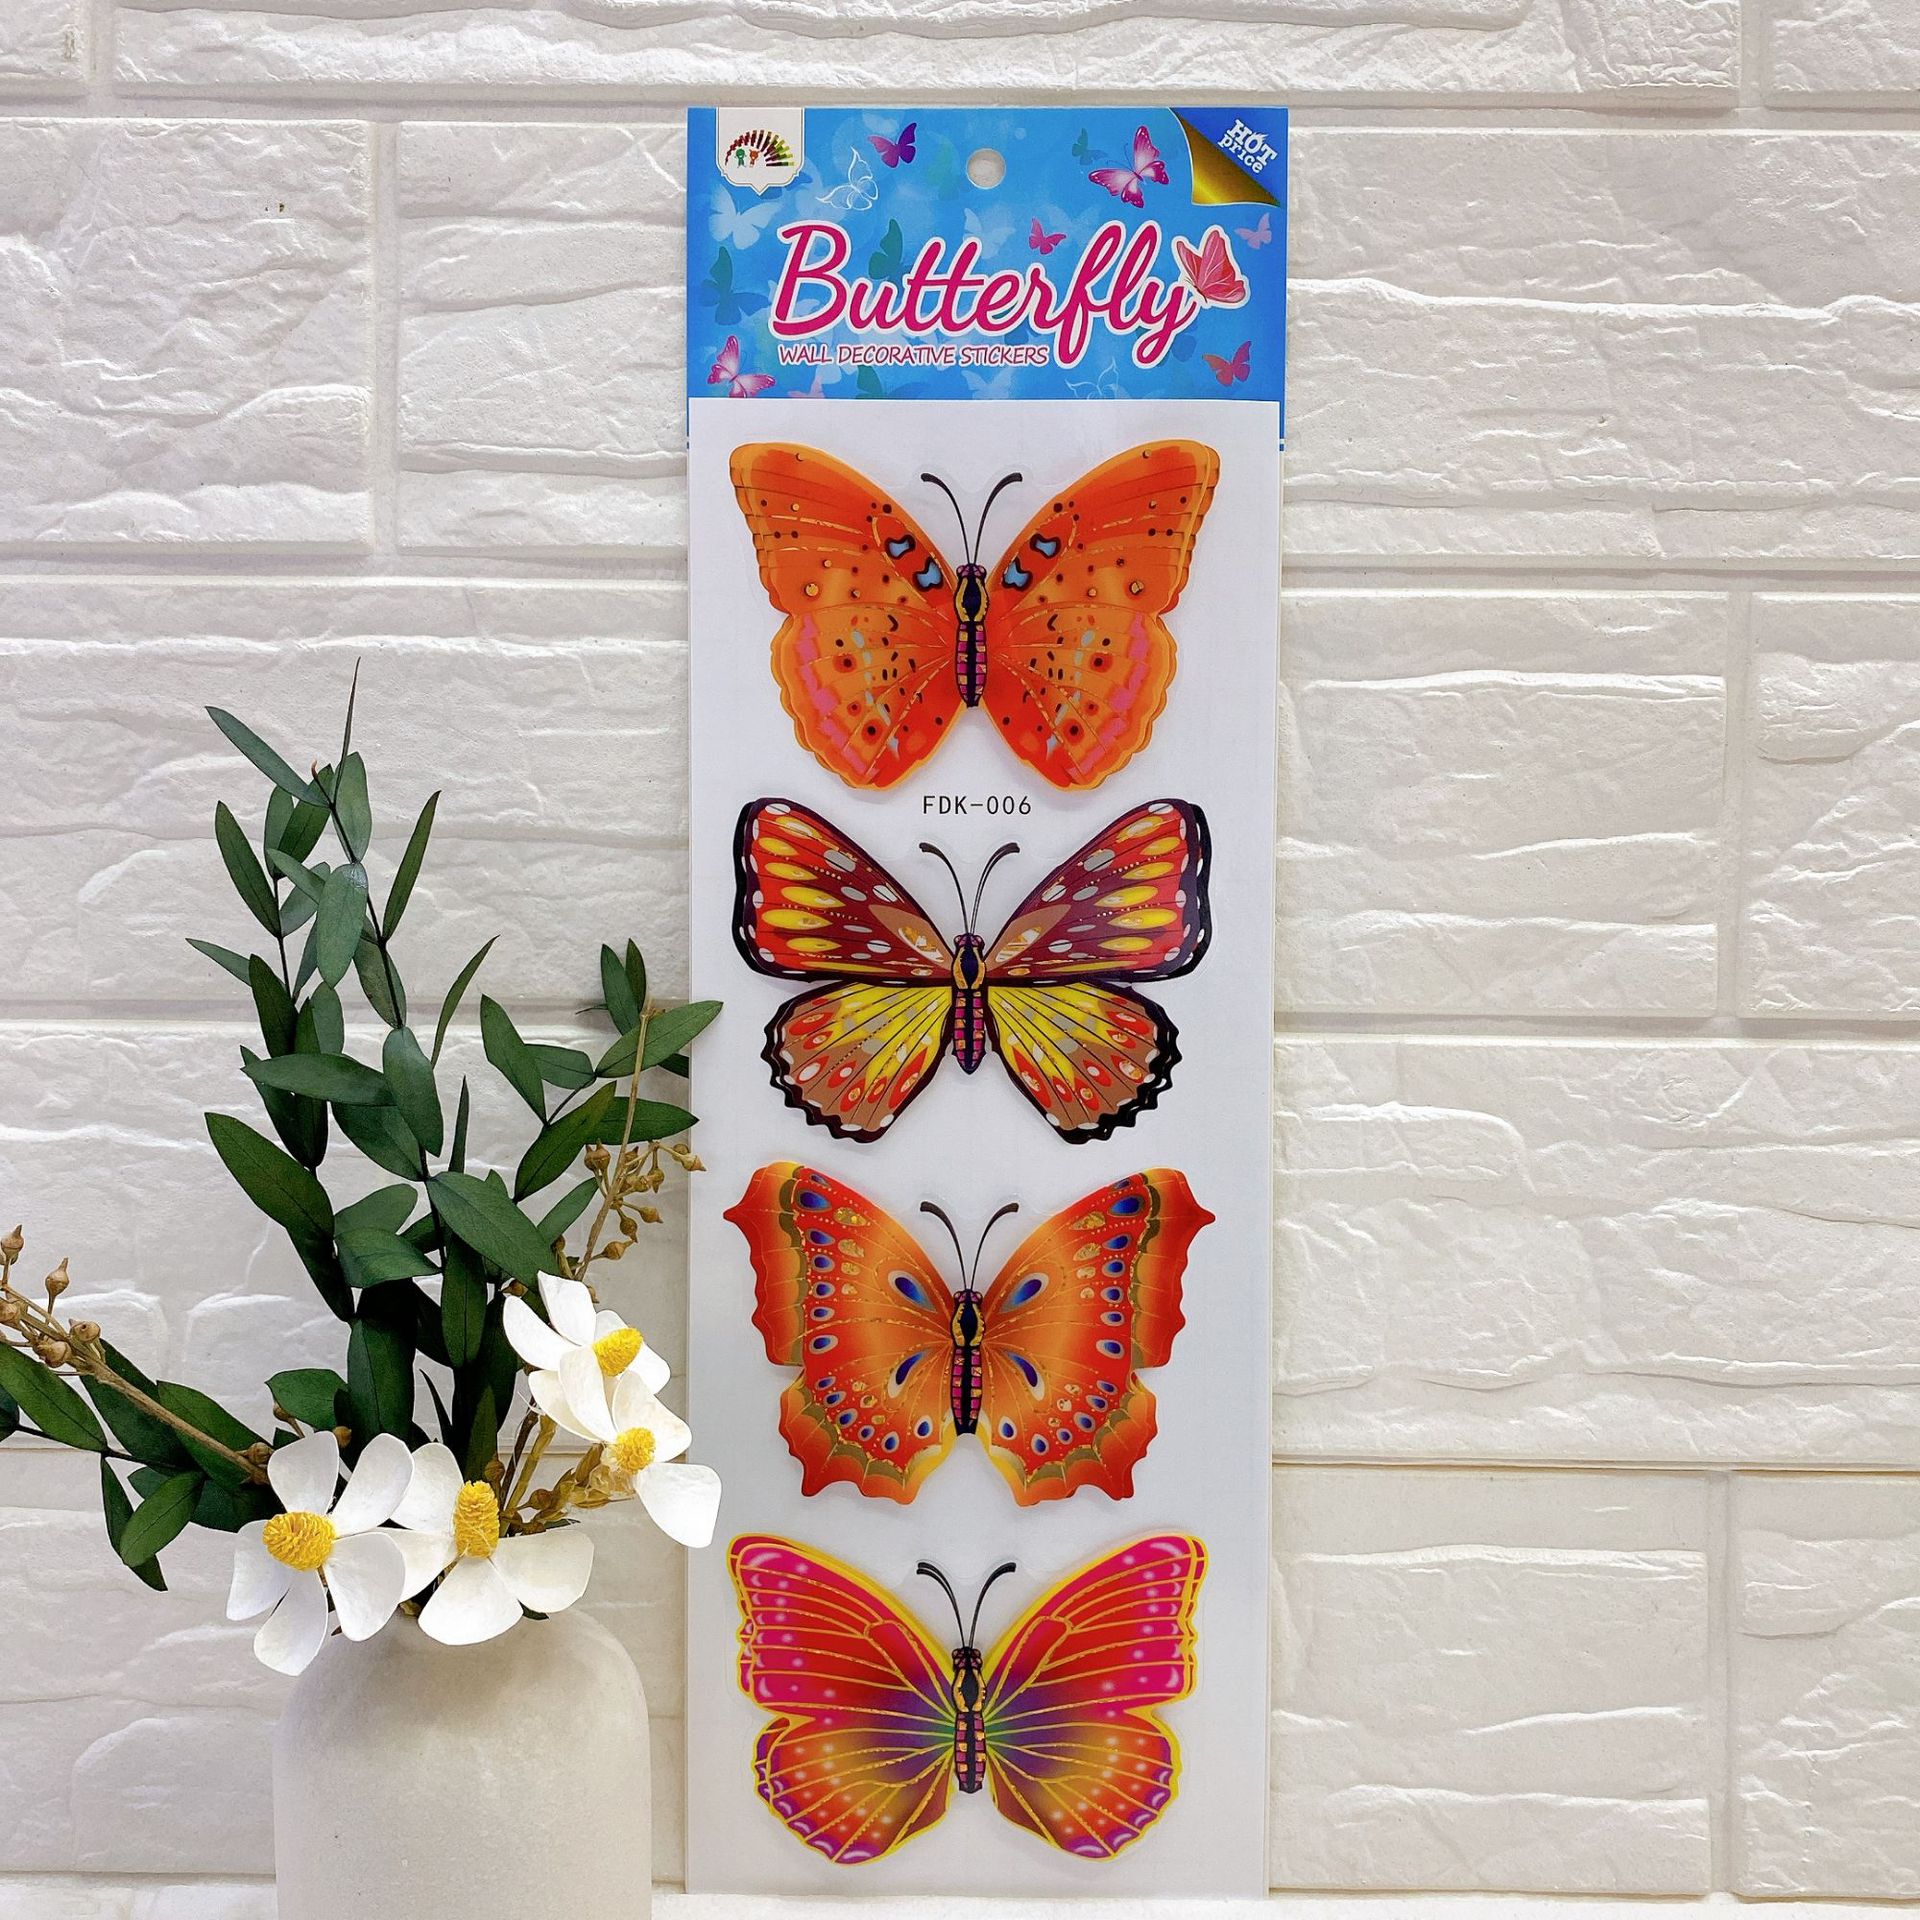 Gilding Four Butterflies Three-Dimensional Stickers Living Room Bedroom Wall Home Decoration Wall Stickers 3D Three-Dimensional Handmade Layer Wall